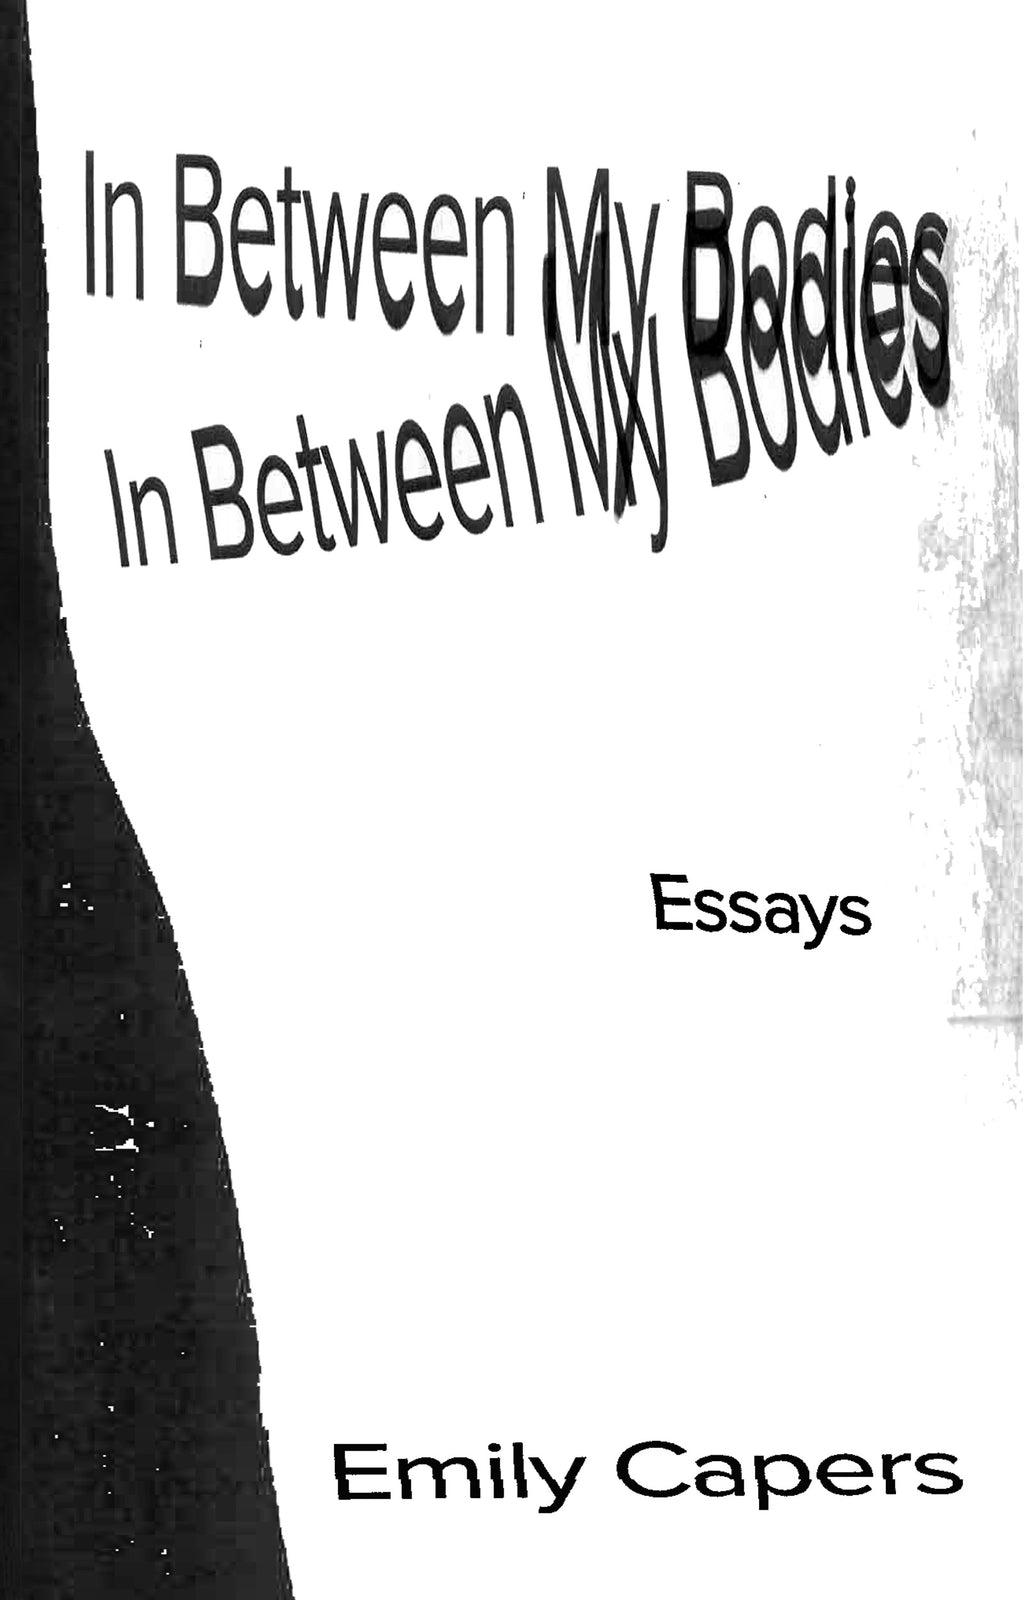 In Between My Bodies by Emily Capers